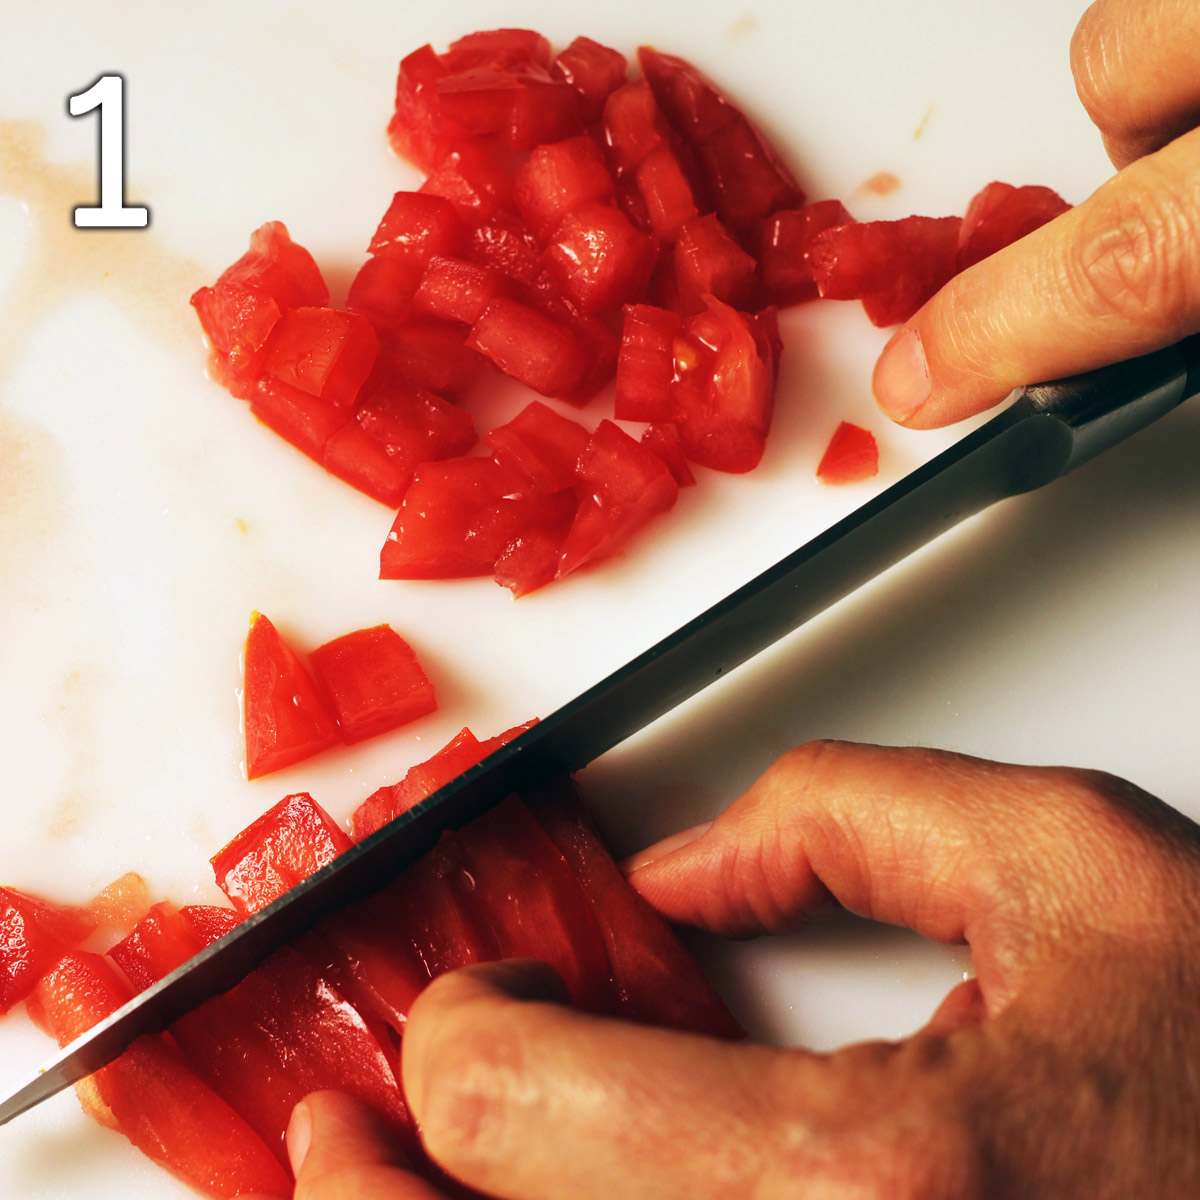 chopping tomatoes on a white cutting board.